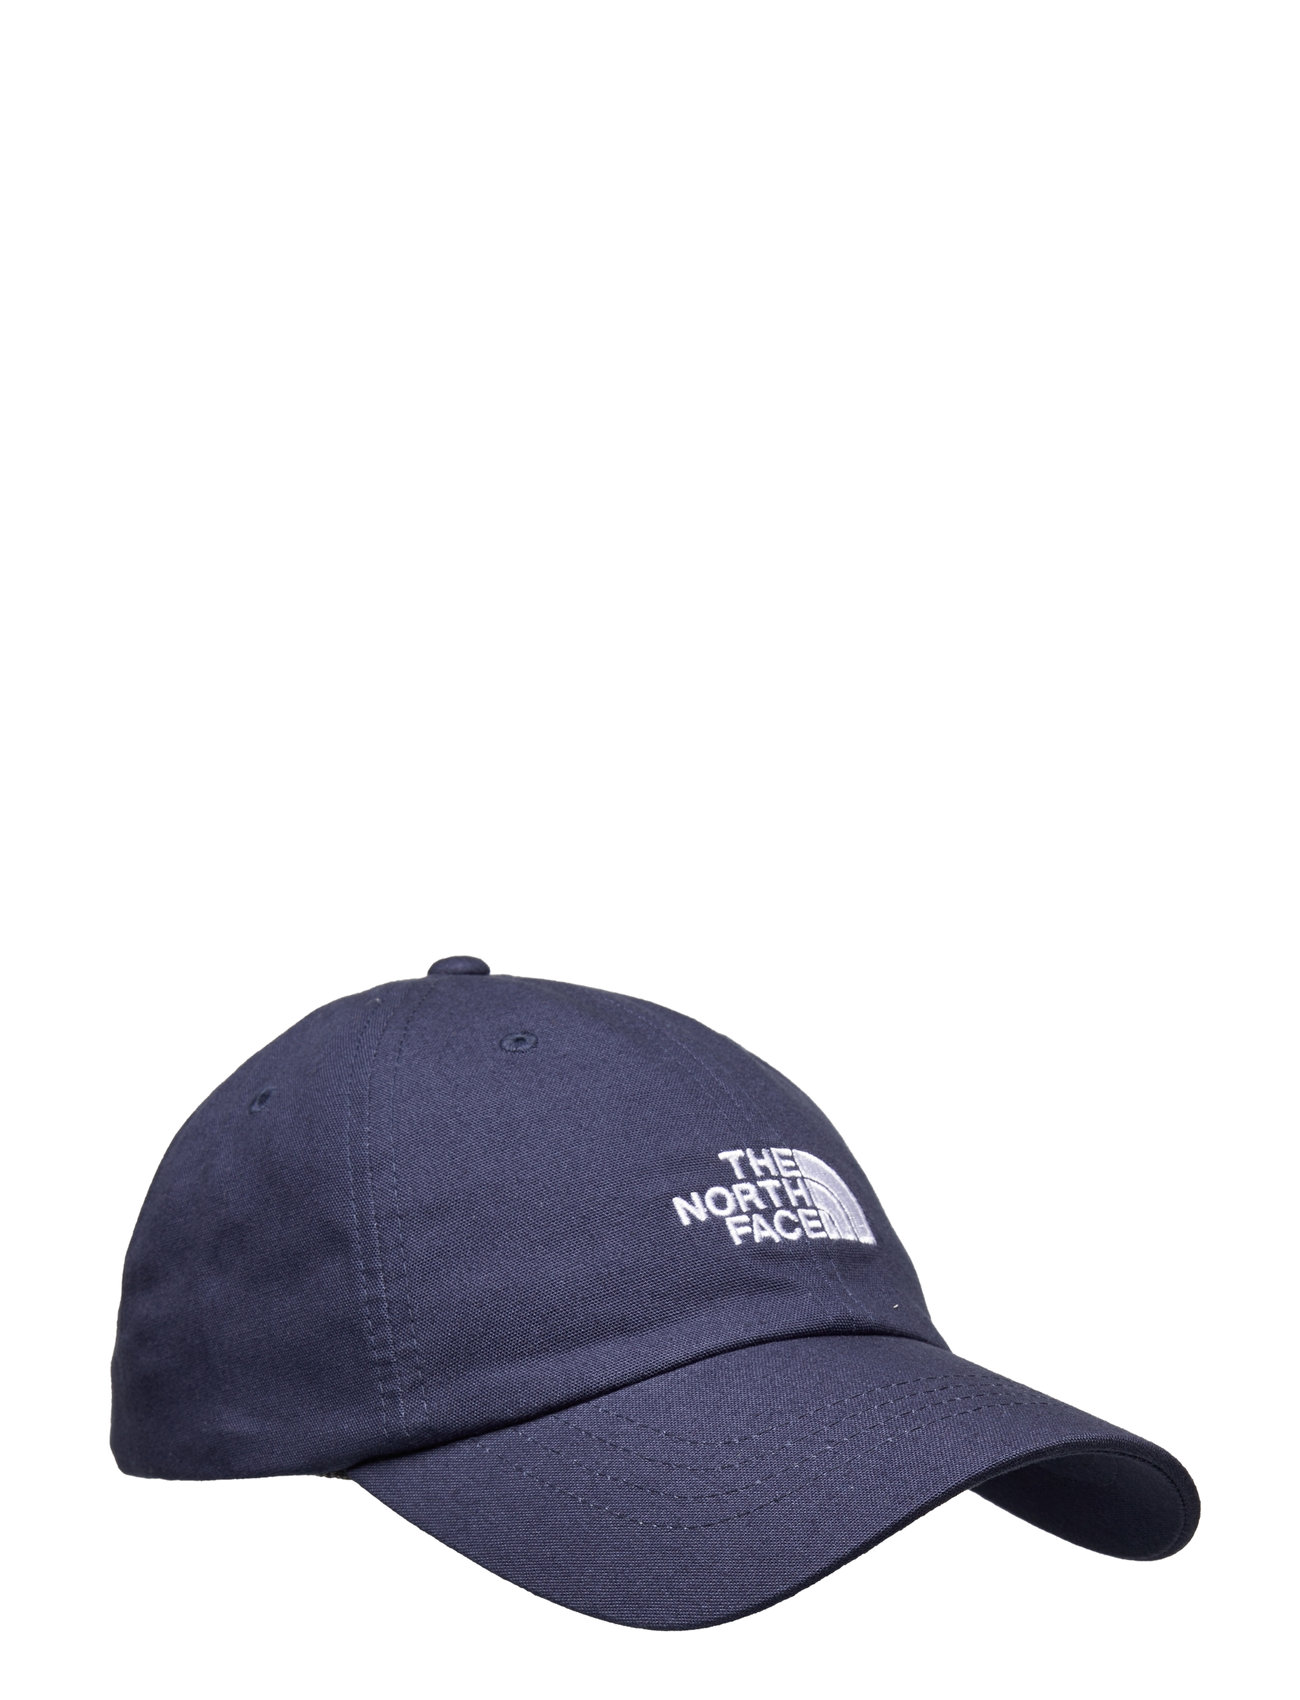 The North Face Norm Hat - Caps